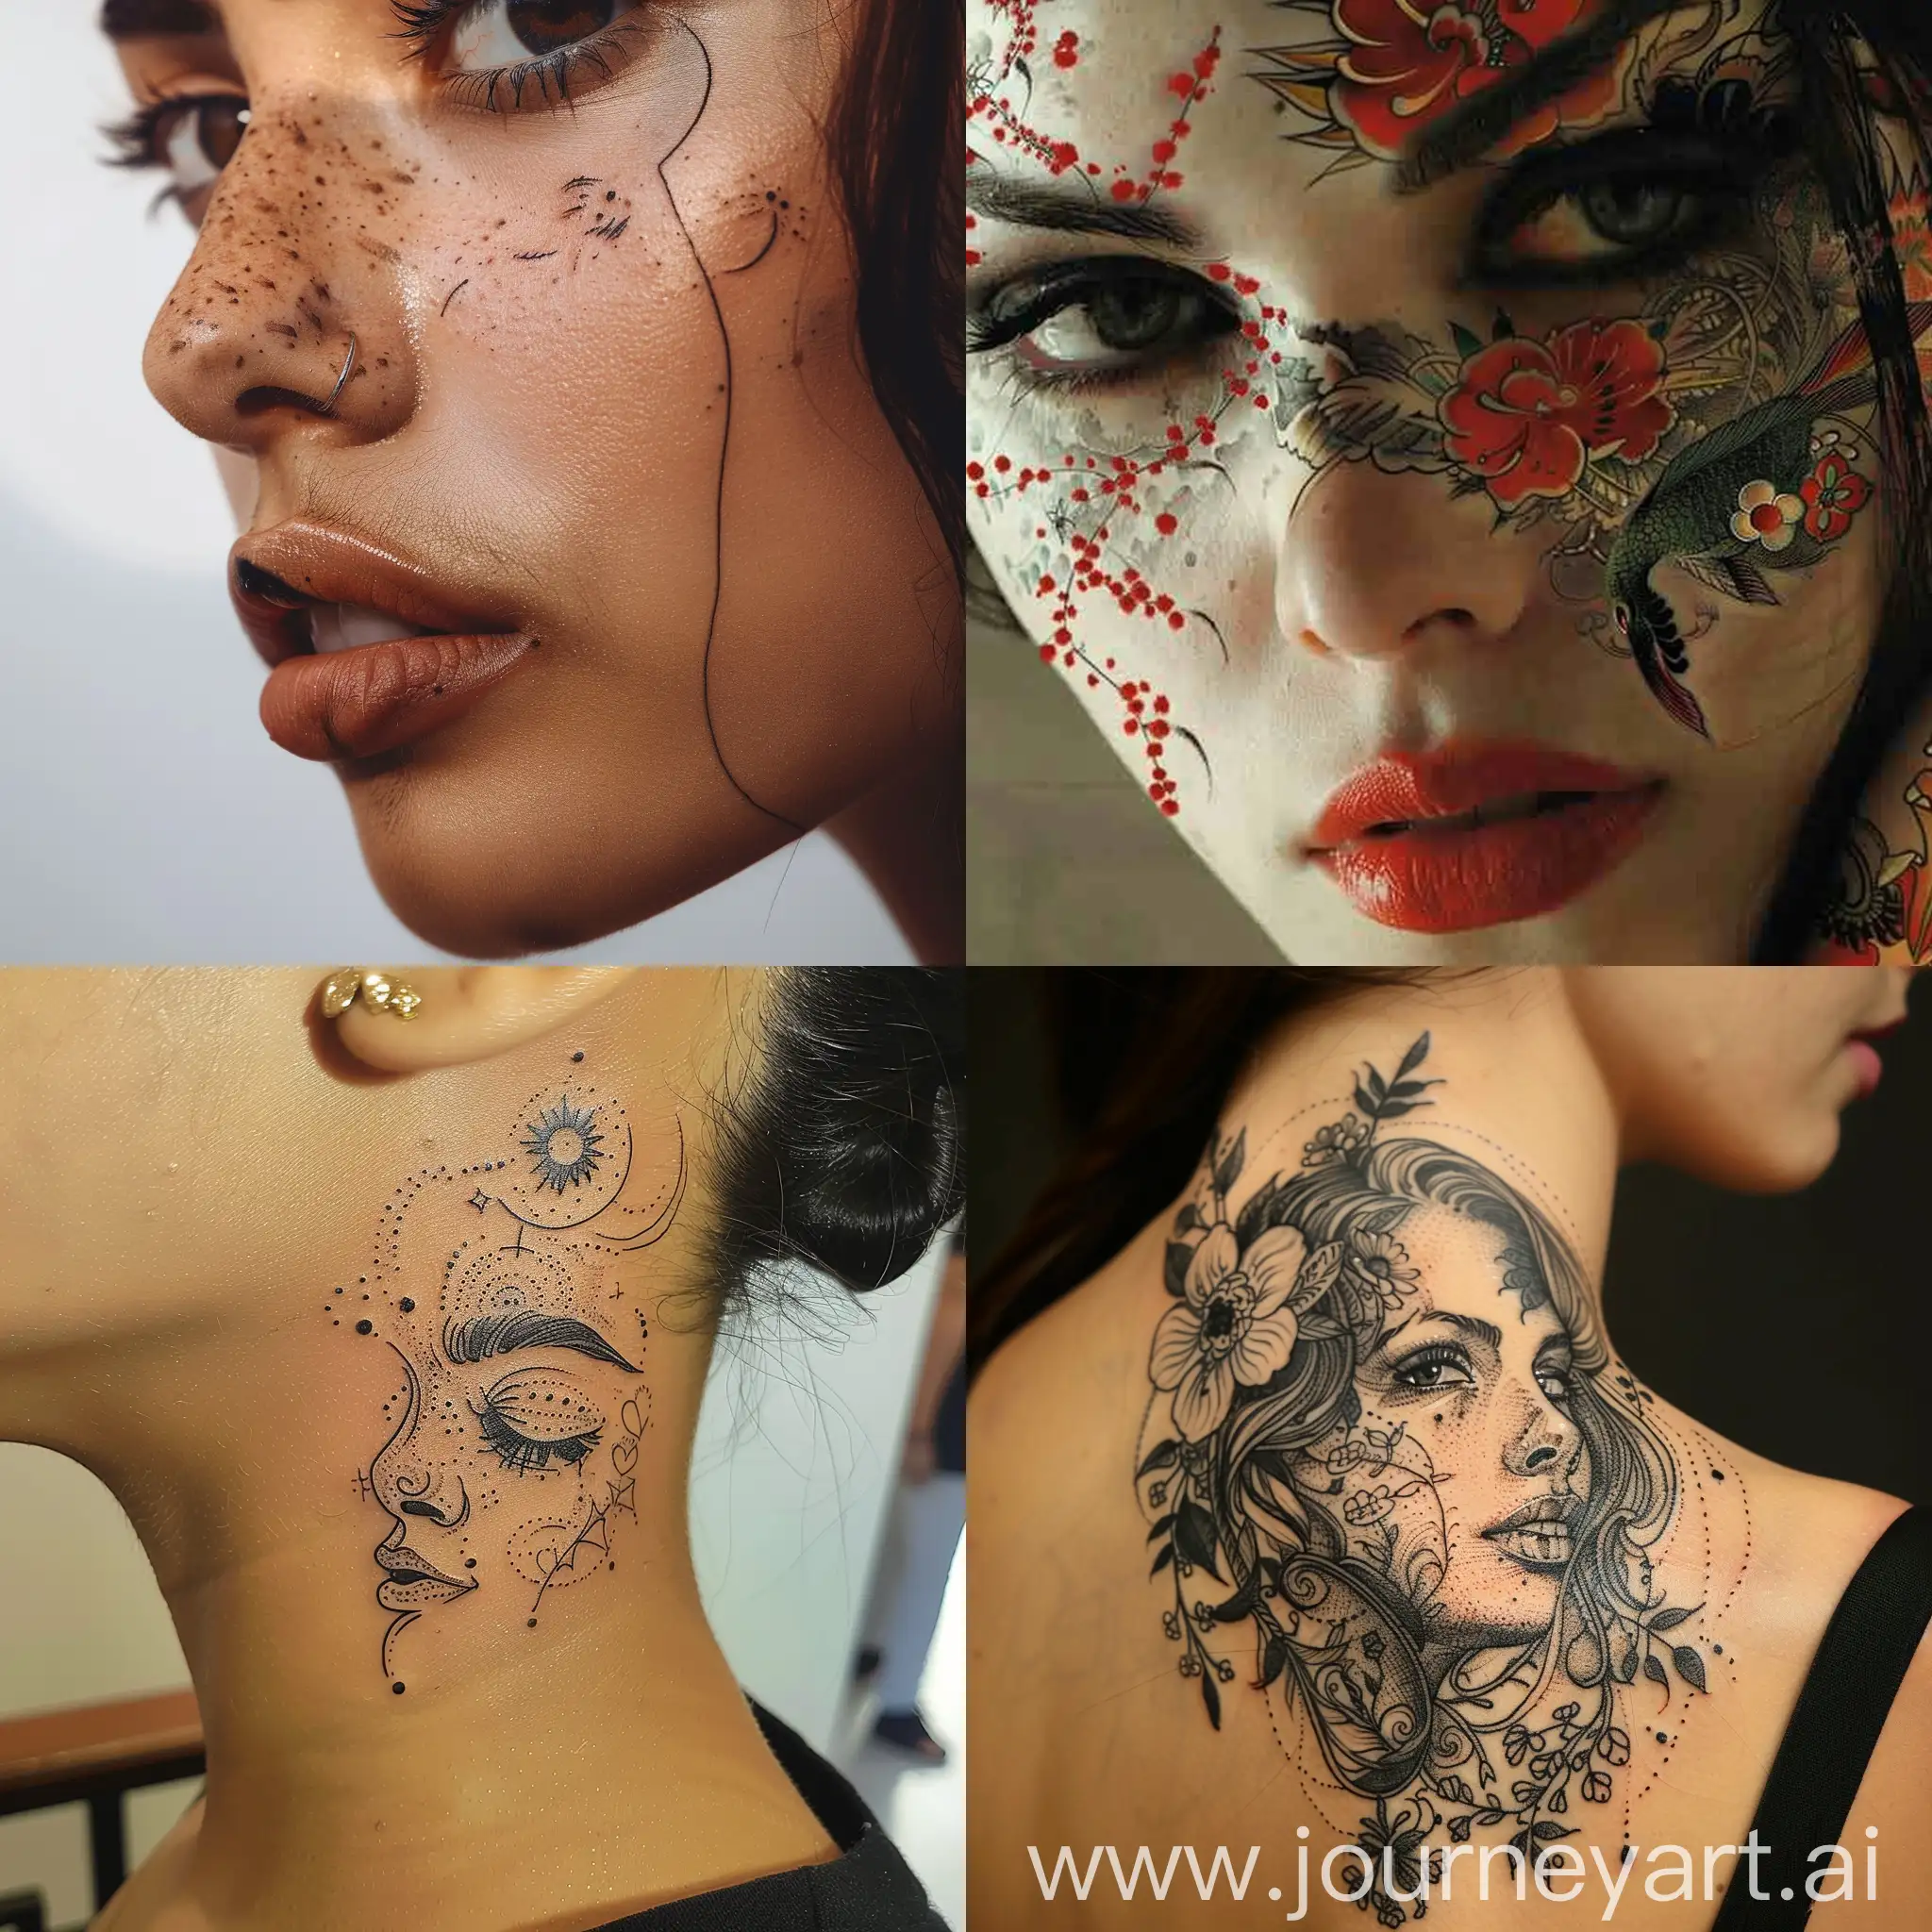 Portrait-of-a-Woman-with-a-Tattooed-Cheek-Closeup-Photography